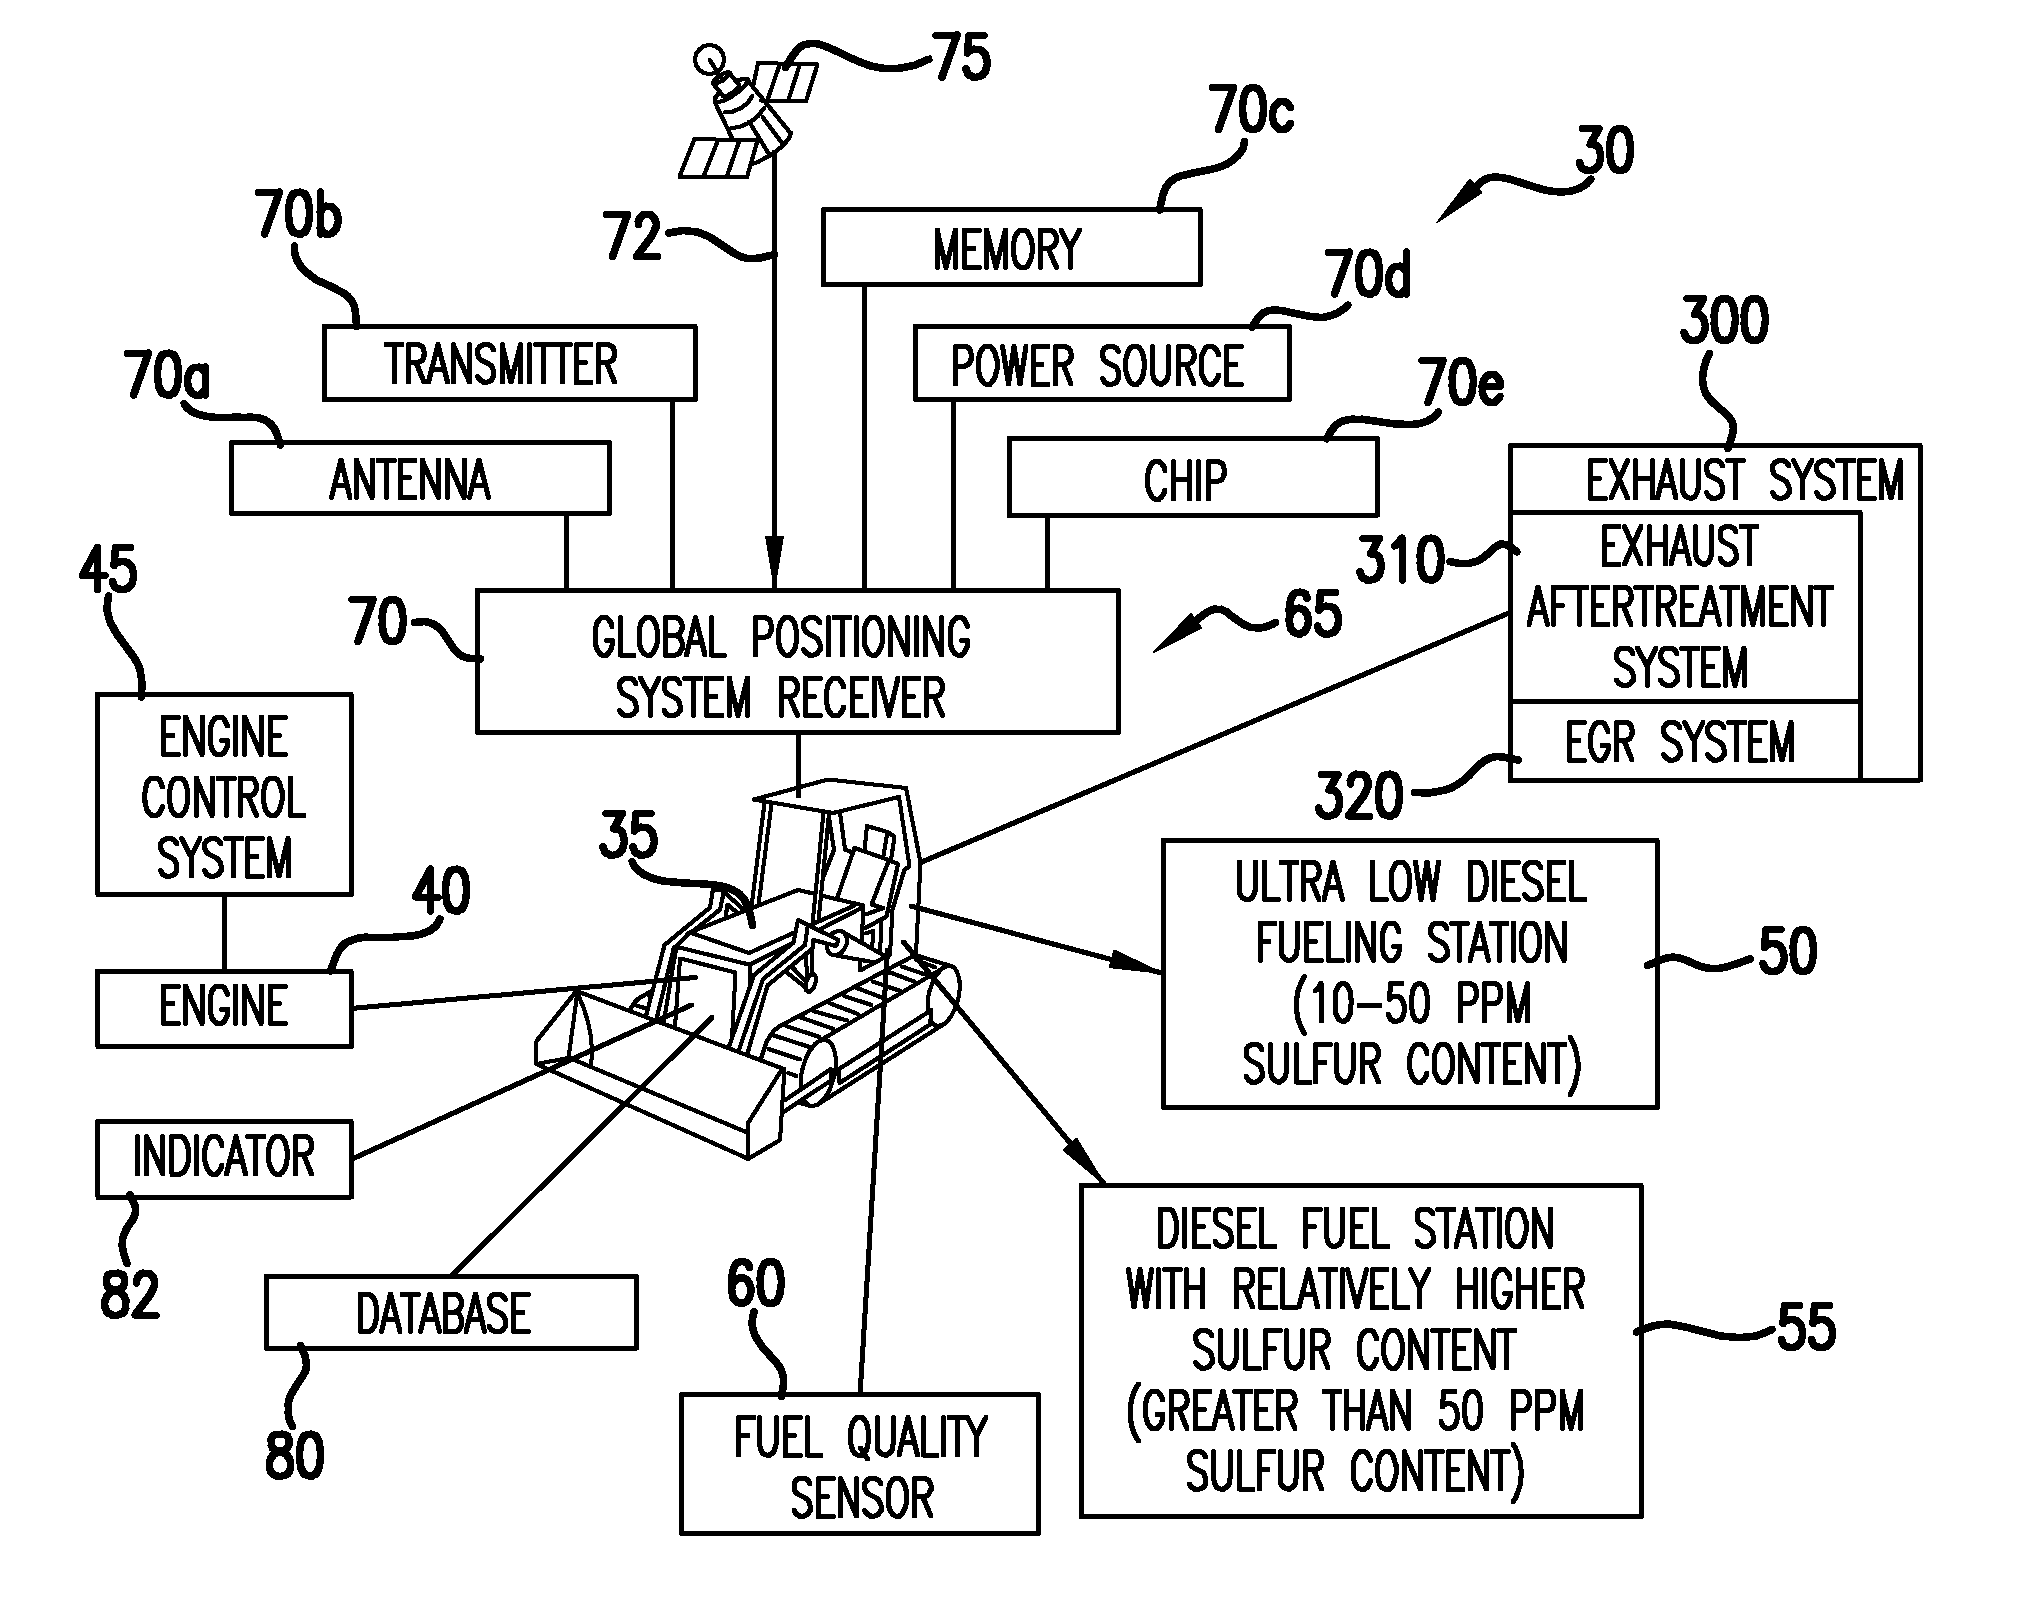 Engine control system and method based on fuel quality